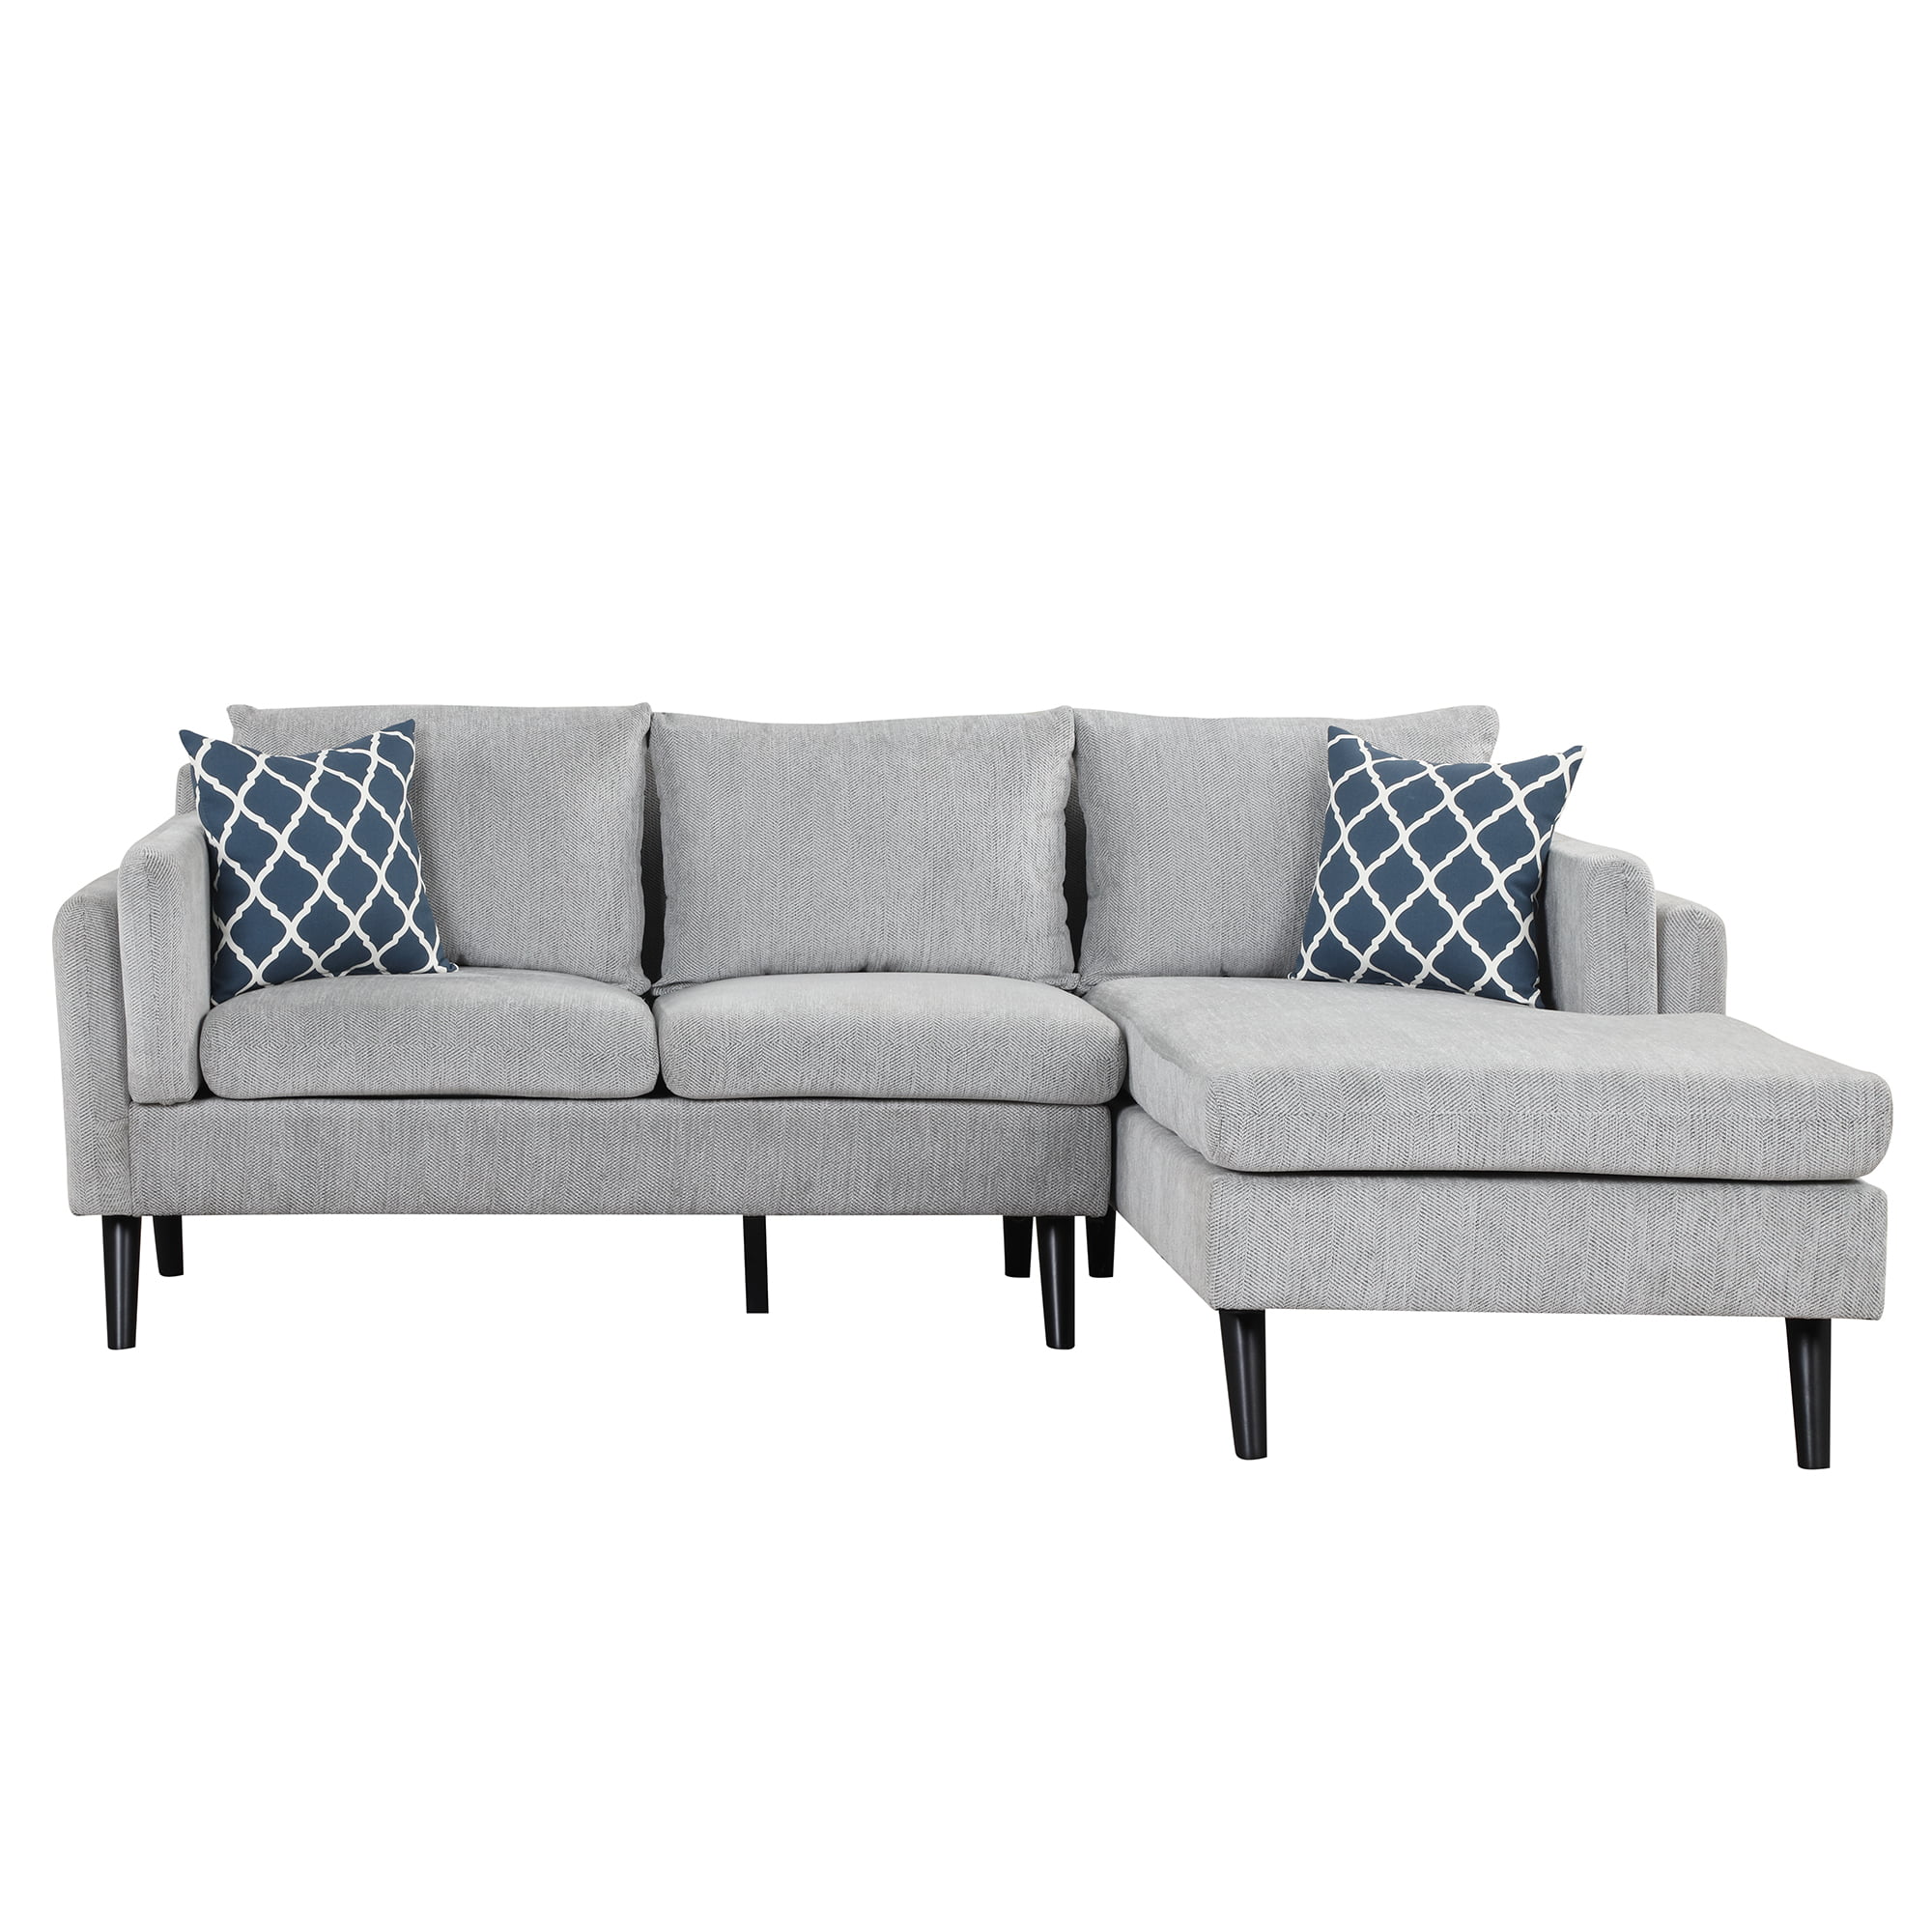 Upholstered L-Shape Sofa Couch with Chaise and 2 Pillows - SG000680AAE